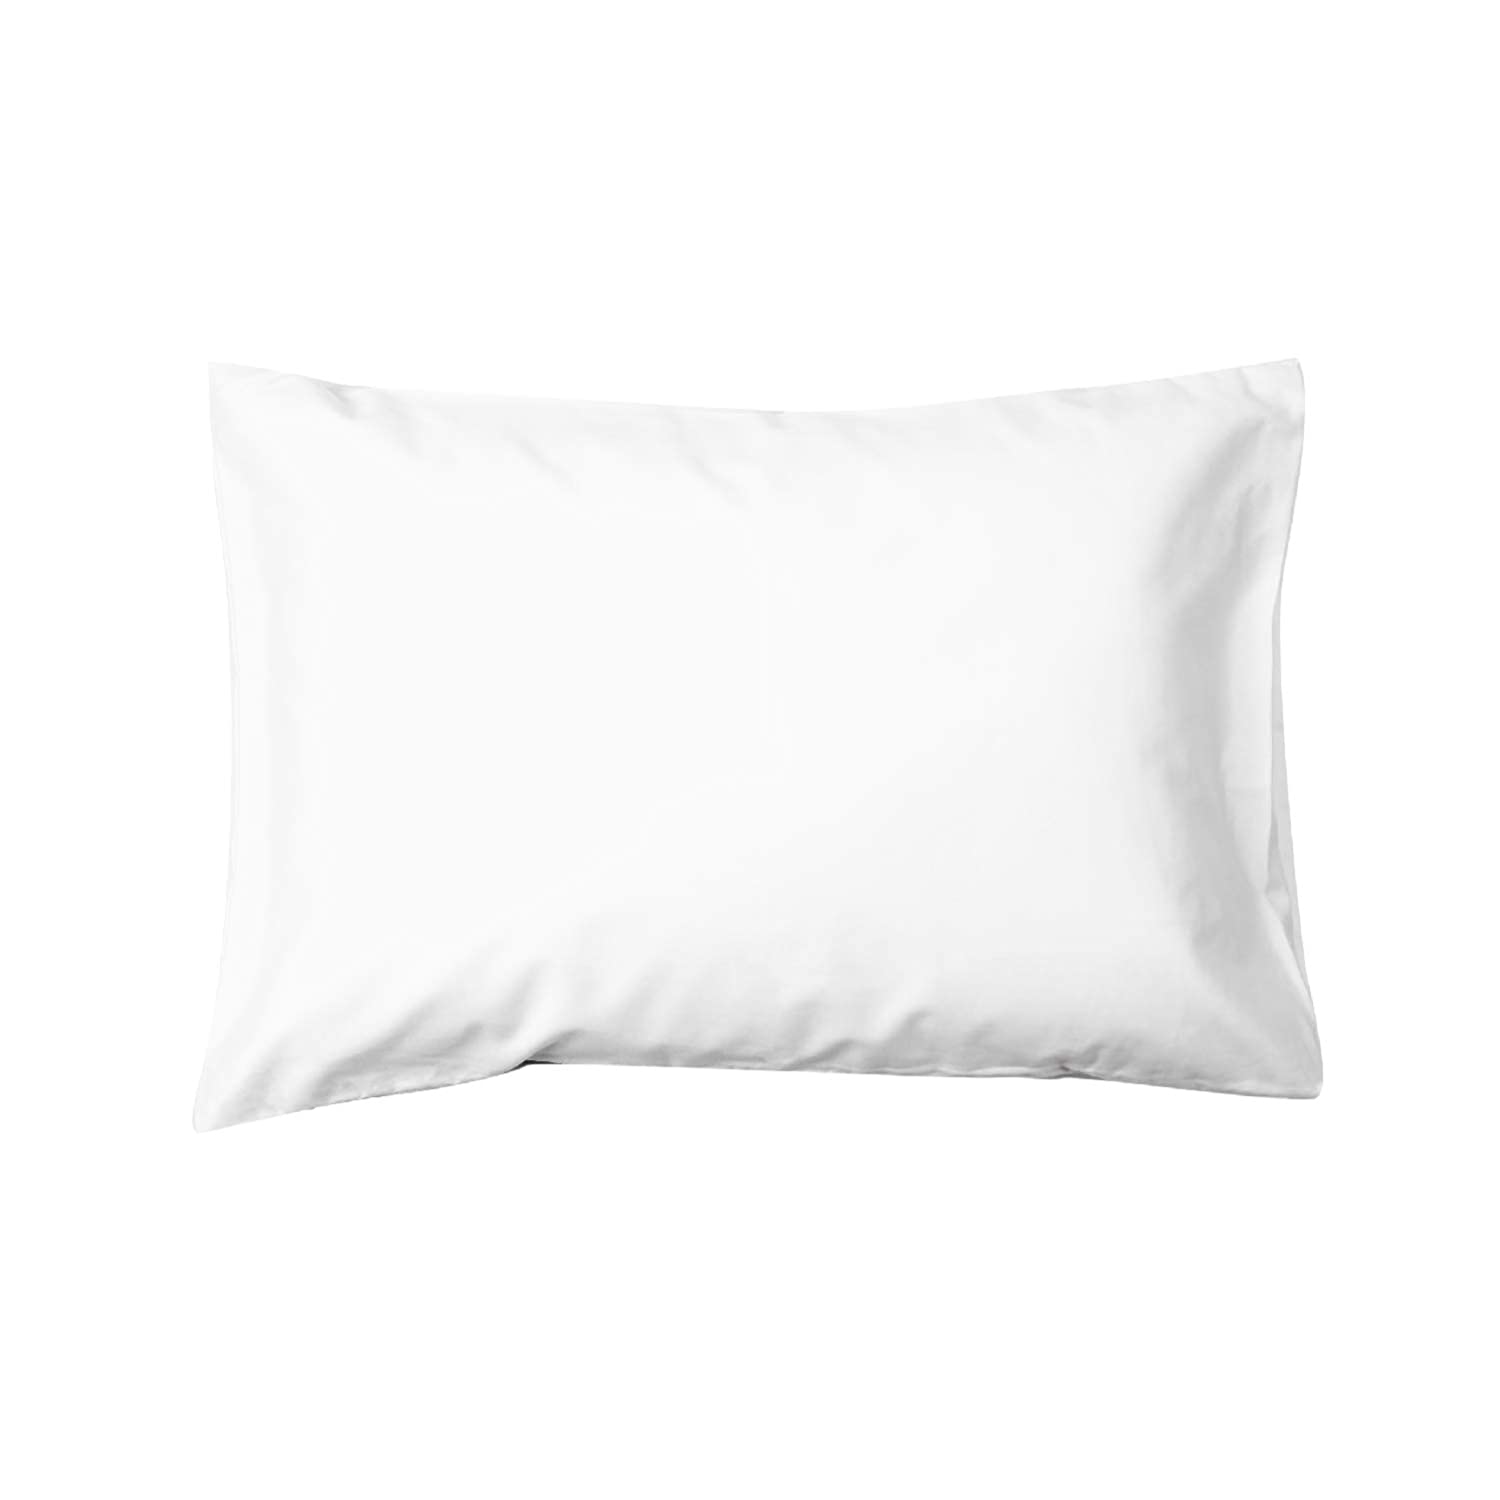 EXQ Home Down Alternative Breathable Toddler Pillow